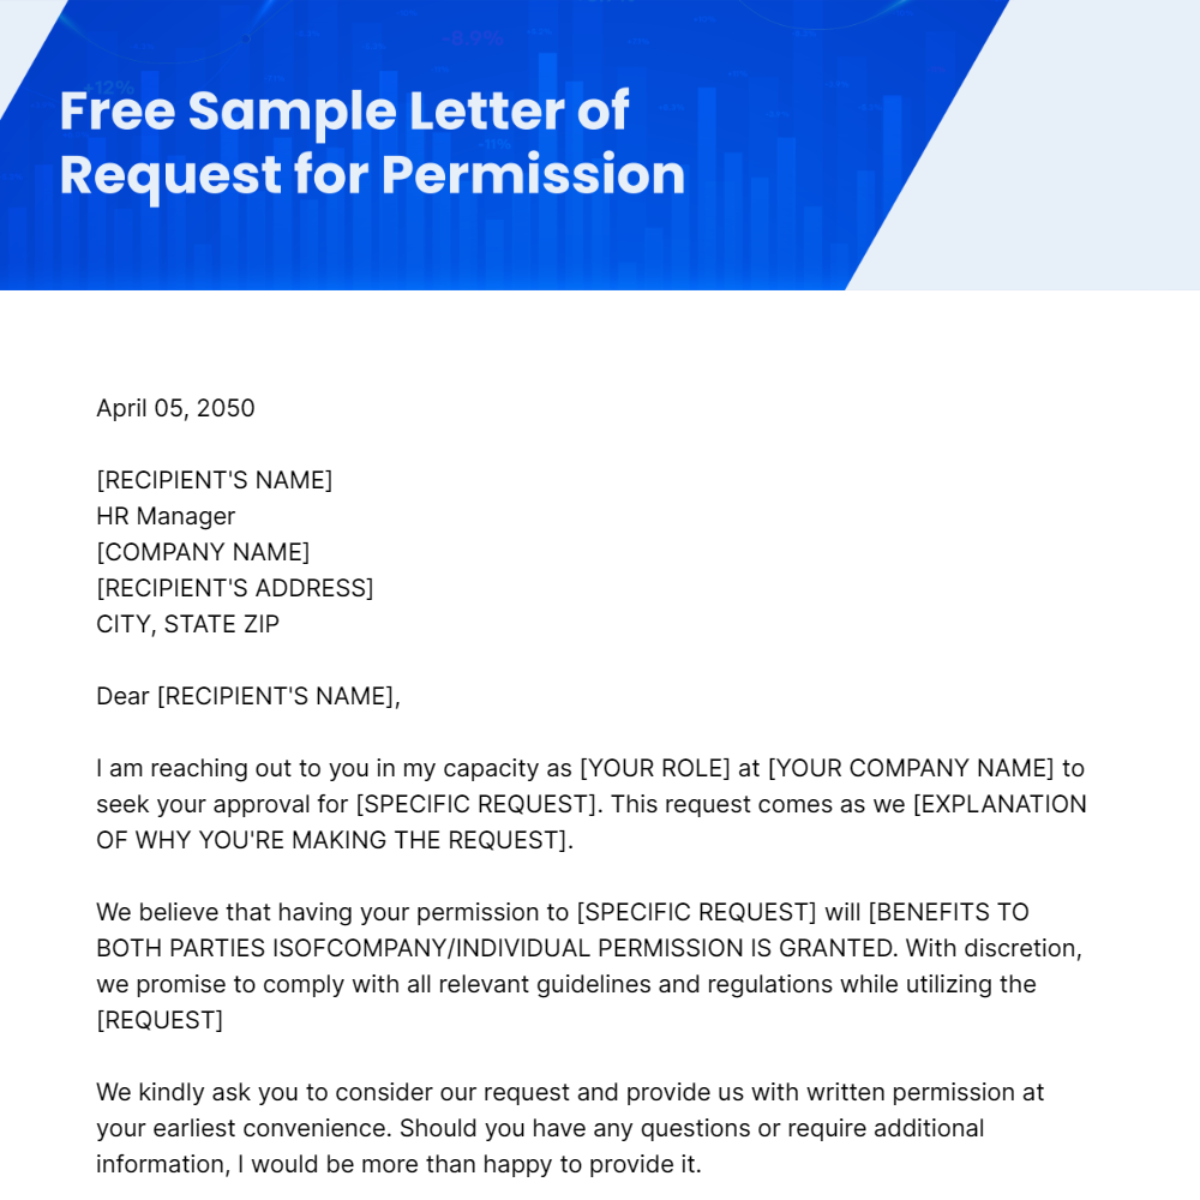 Free Sample Letter of Request for Permission Template